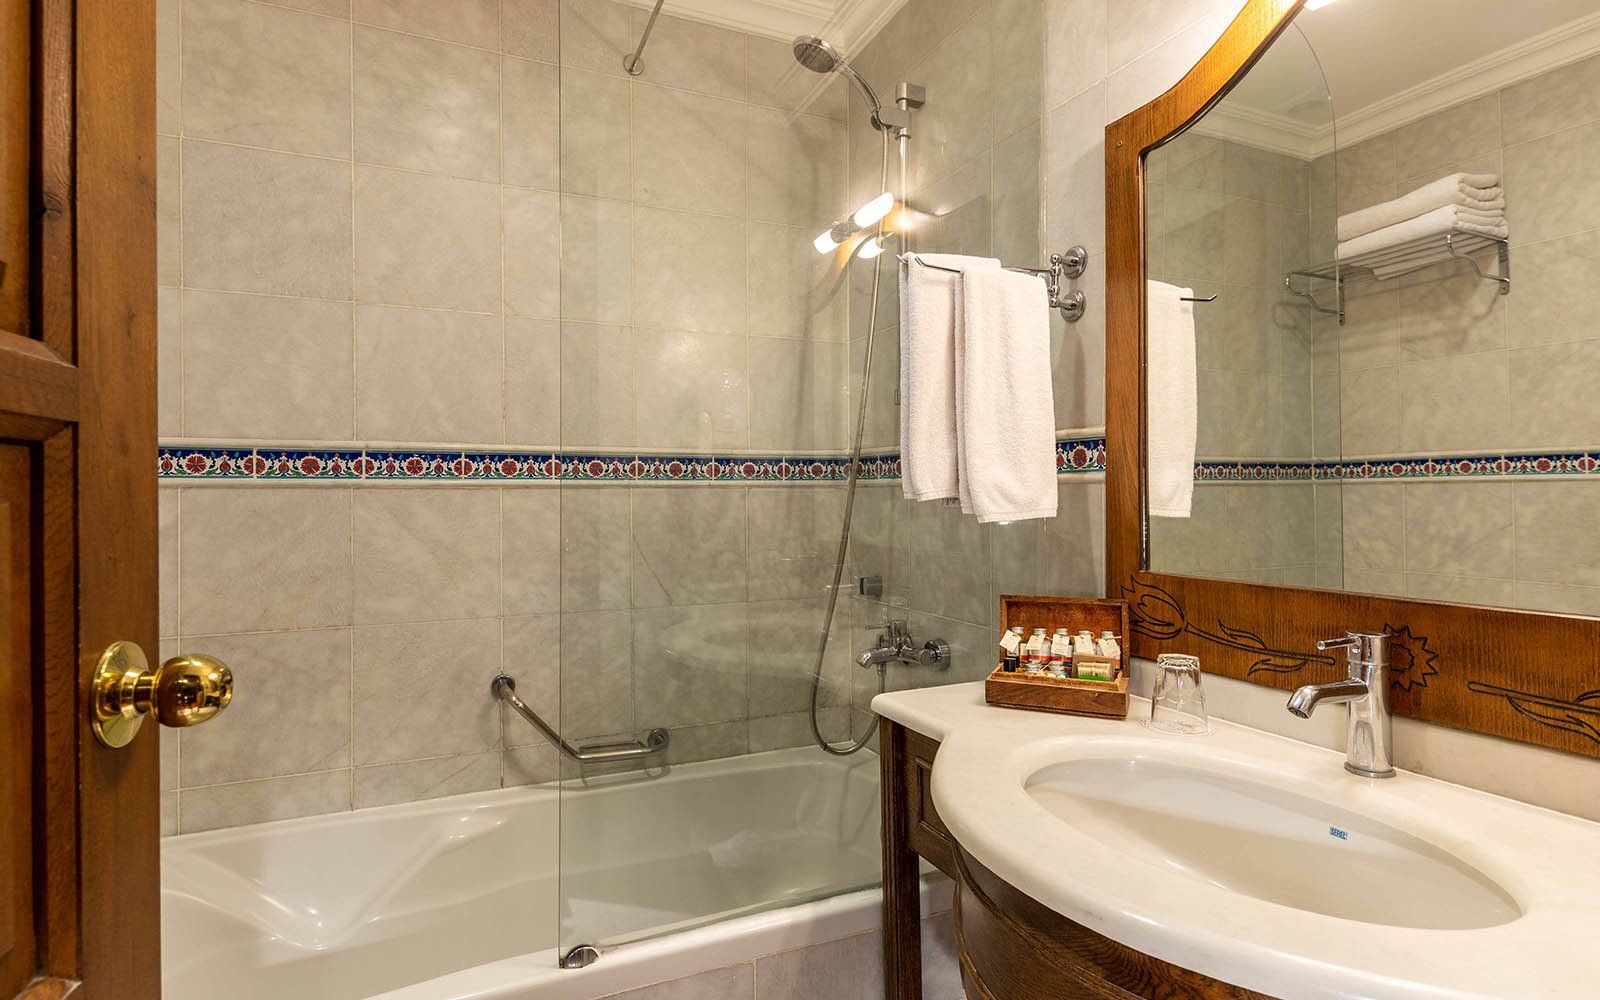 Sultanhan Hotel İstanbul , Deluxe Single Room